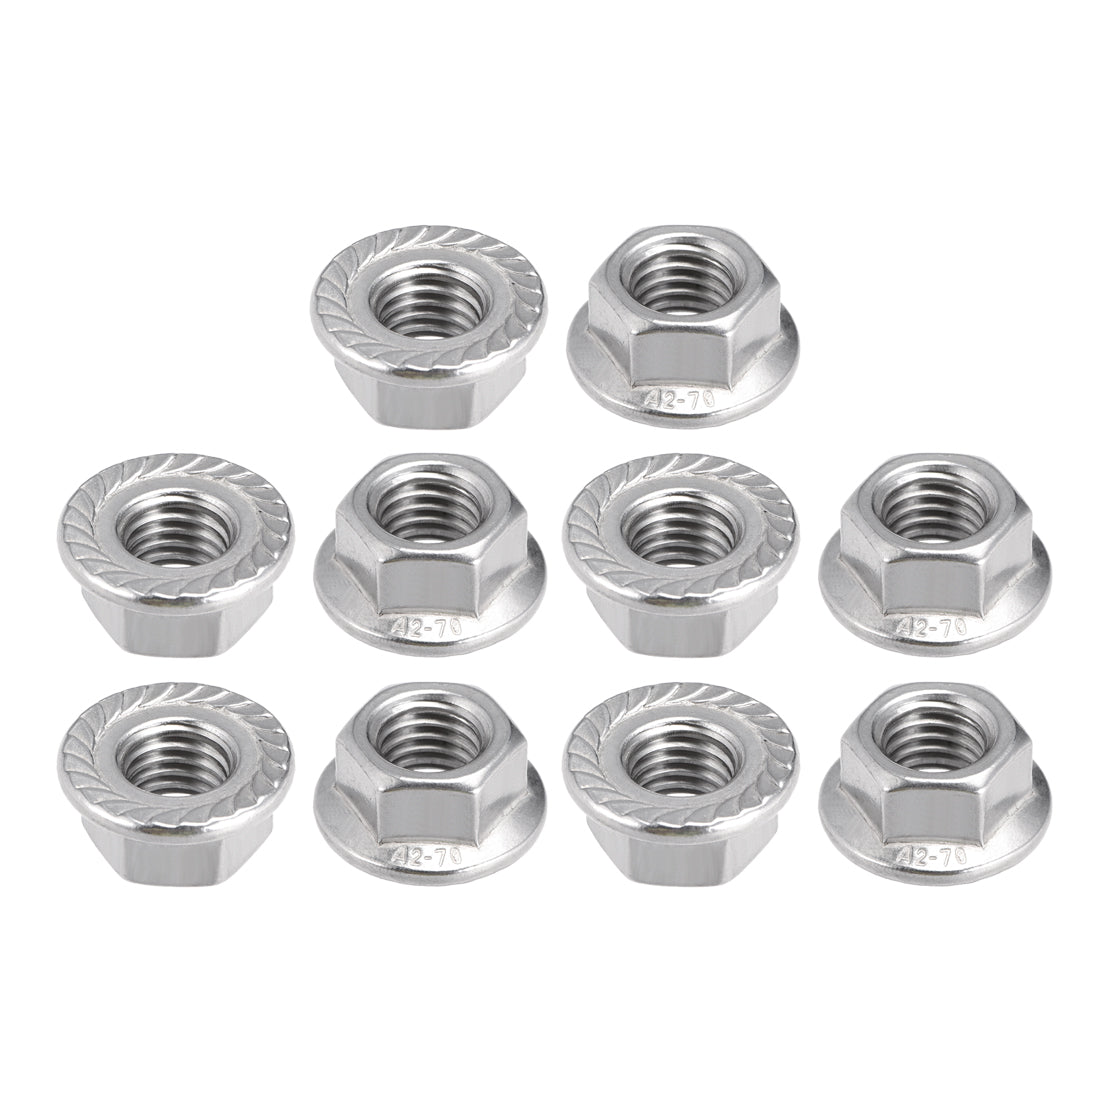 Uxcell Uxcell M4 Serrated Flange Hex Lock Nuts, 304 Stainless Steel, 10 Pcs